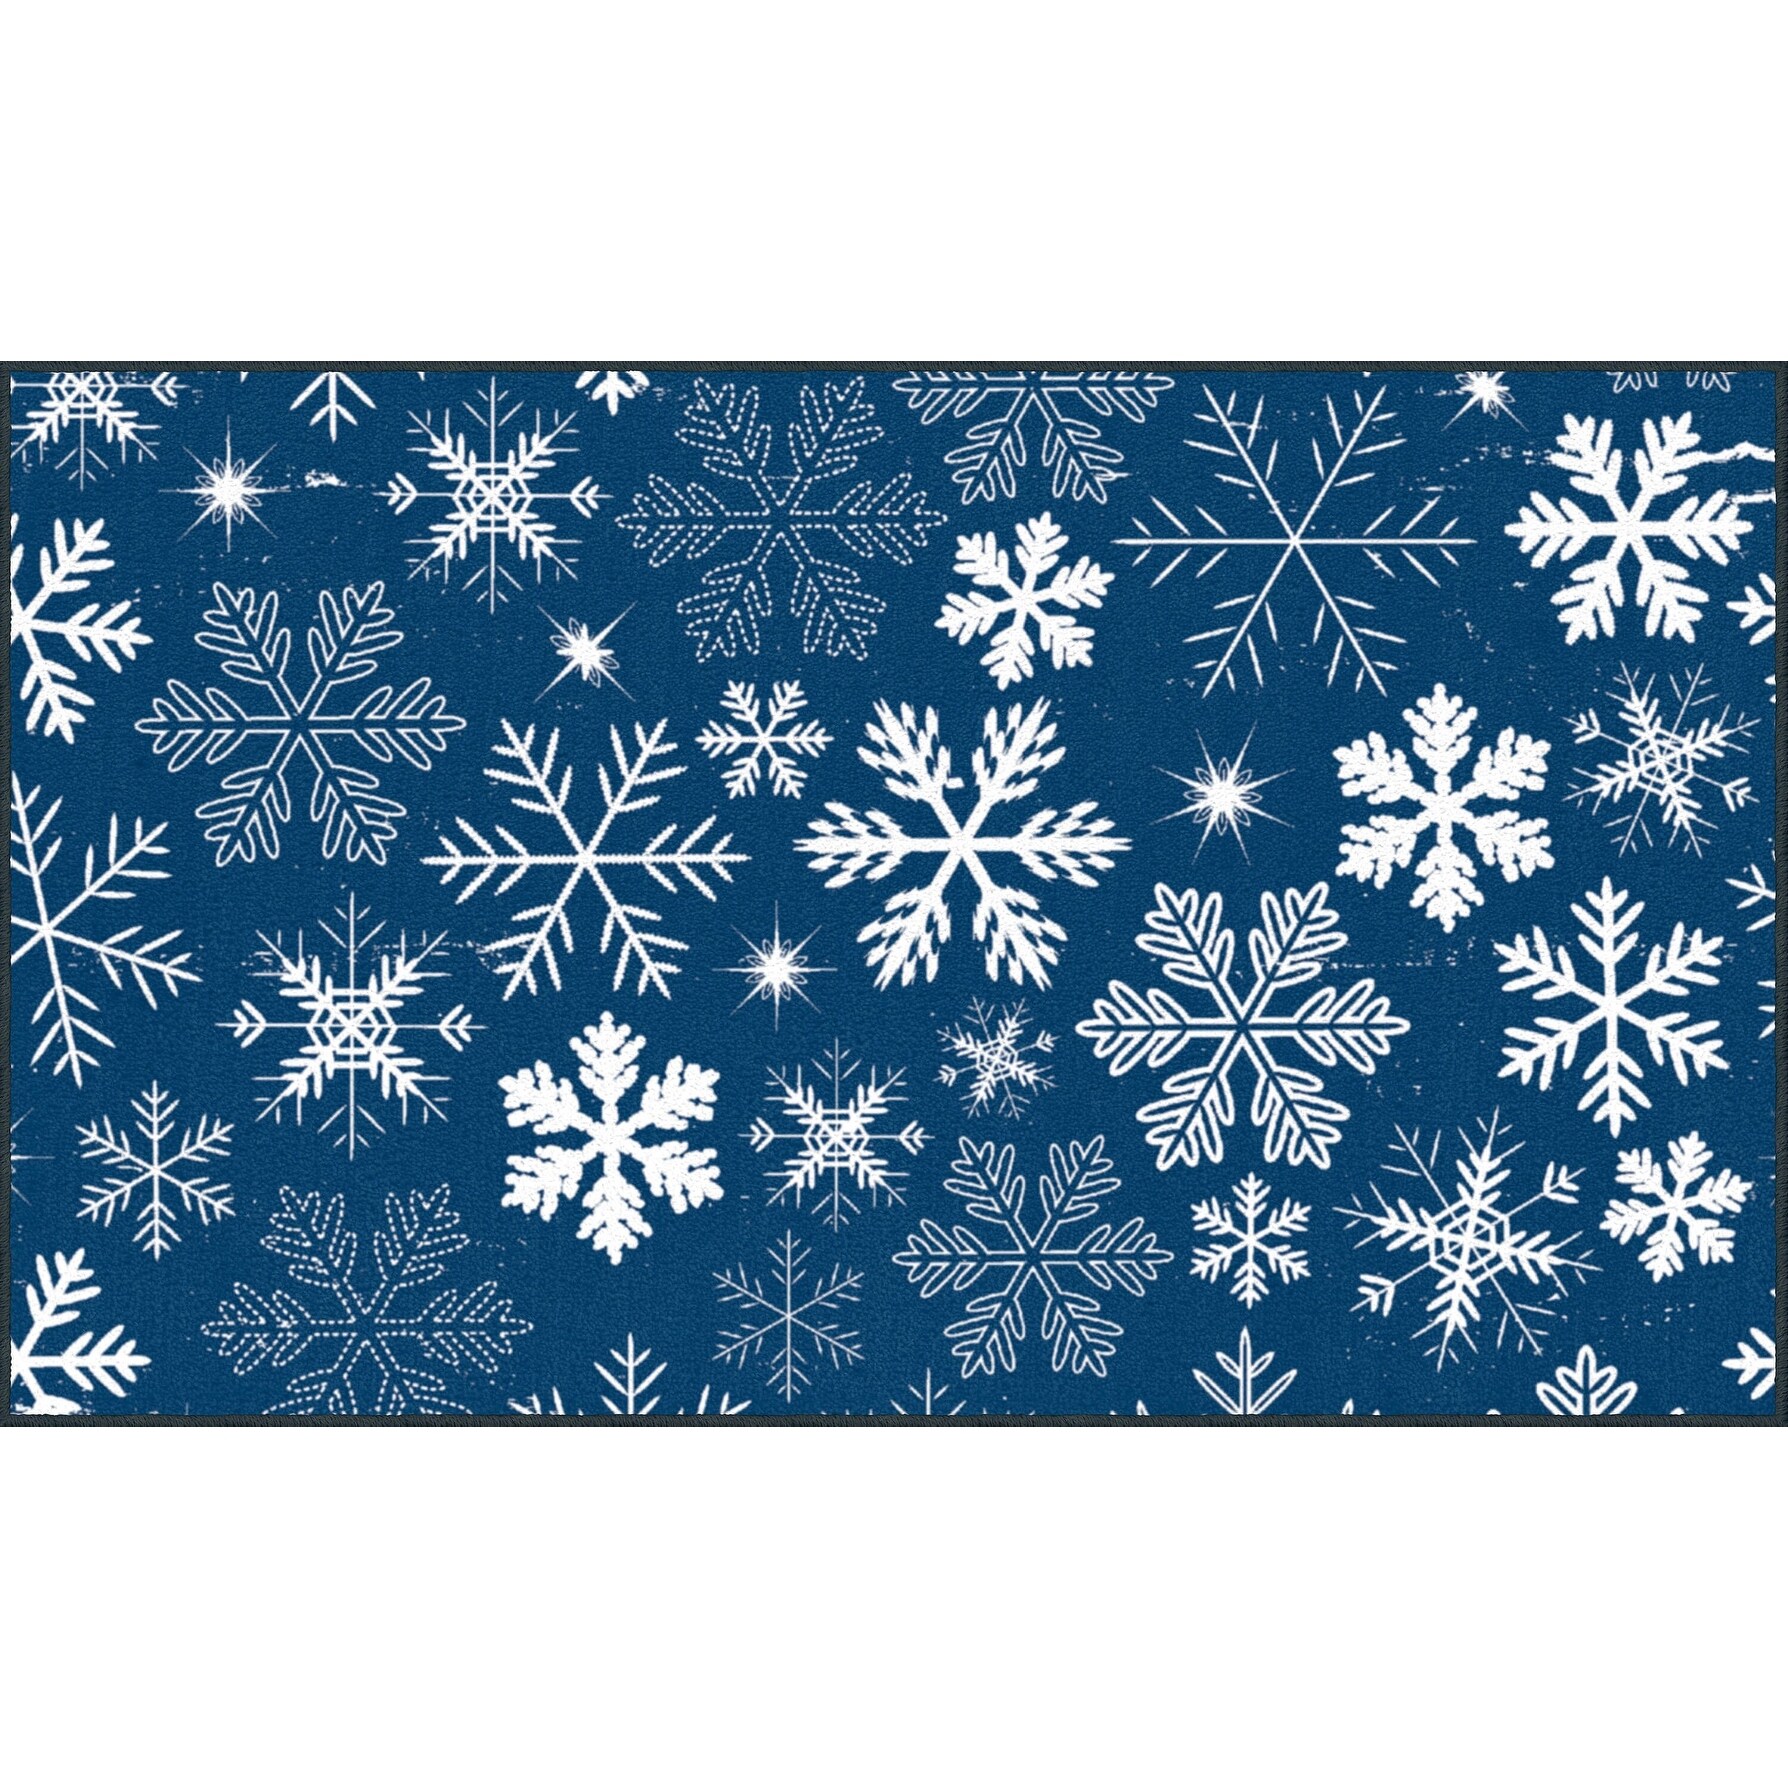 https://ak1.ostkcdn.com/images/products/is/images/direct/0357d68f9c14cab1d0aa2cee5715d36361731572/Mohawk-Prismatic-Snowflakes-Area-Rug.jpg